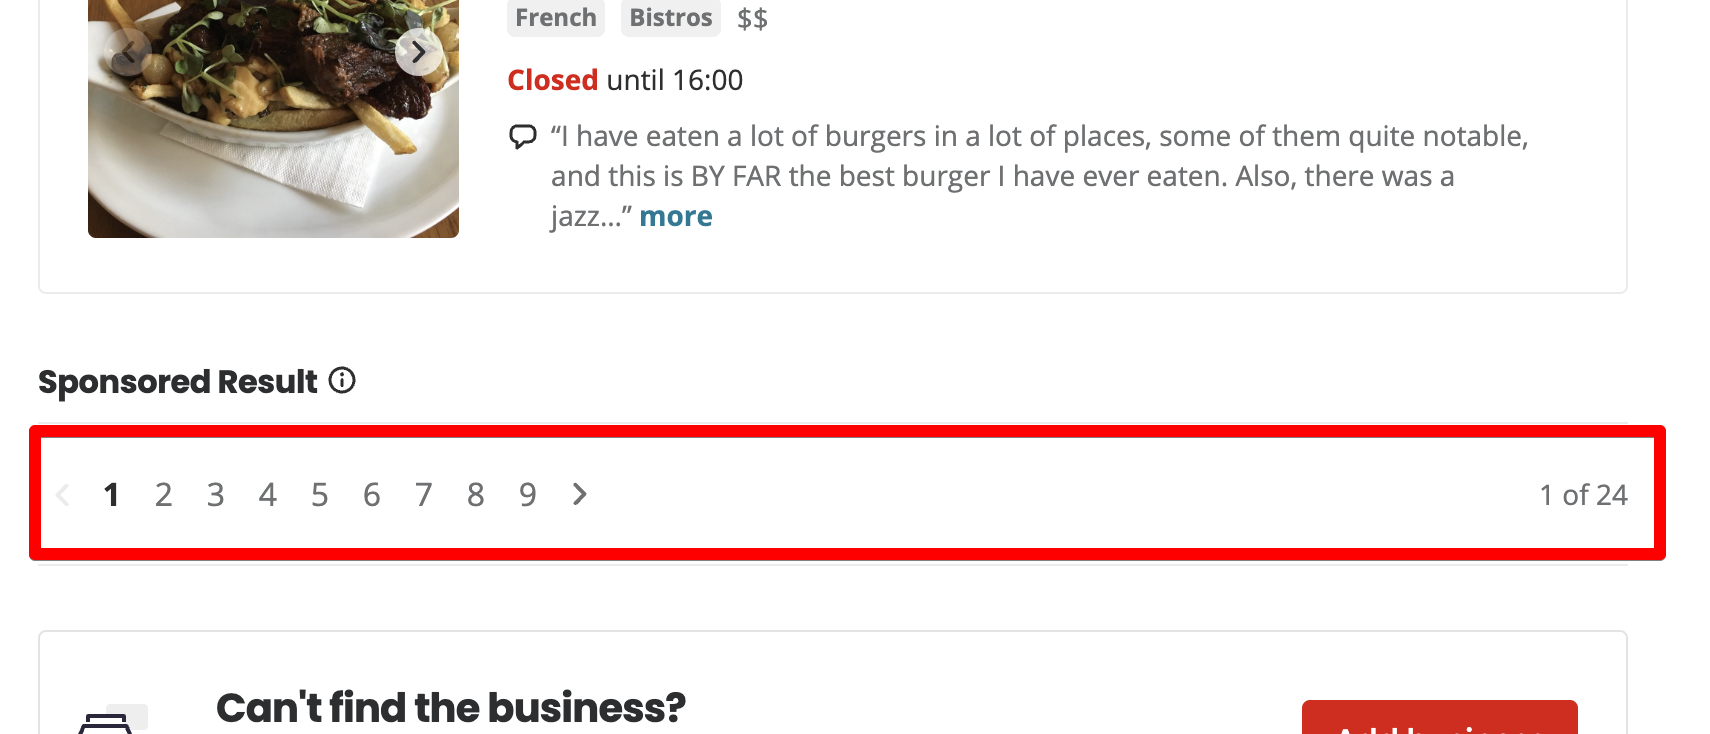 Pagination on the Yelp search results page